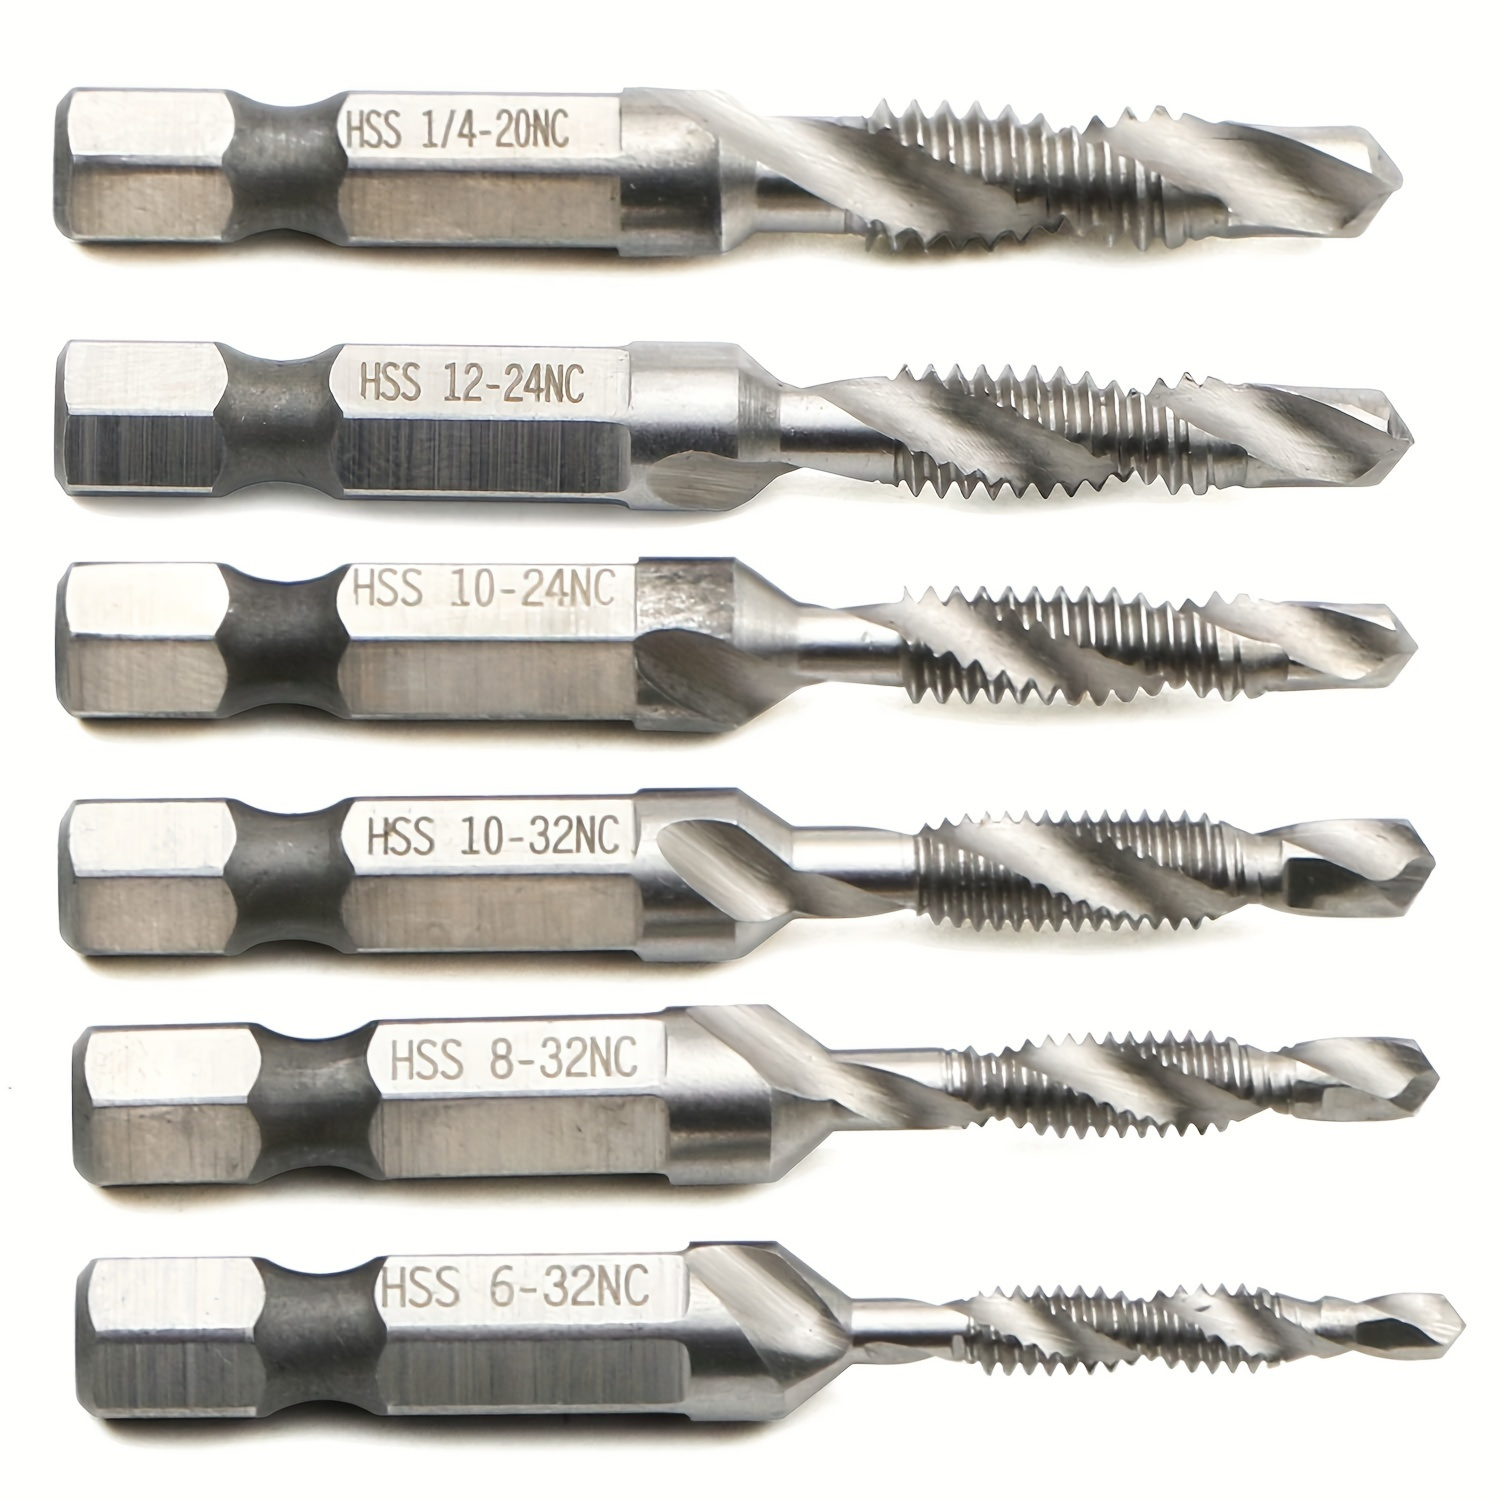 

6pcs Hss 2-in-1 Drill And Tap Bit Set, Fractional 1/8 To 3/8 Inch With 1/4 Inch Hex Shank And Spiral Flute Tapping Tool Set Kit, Hand Tool